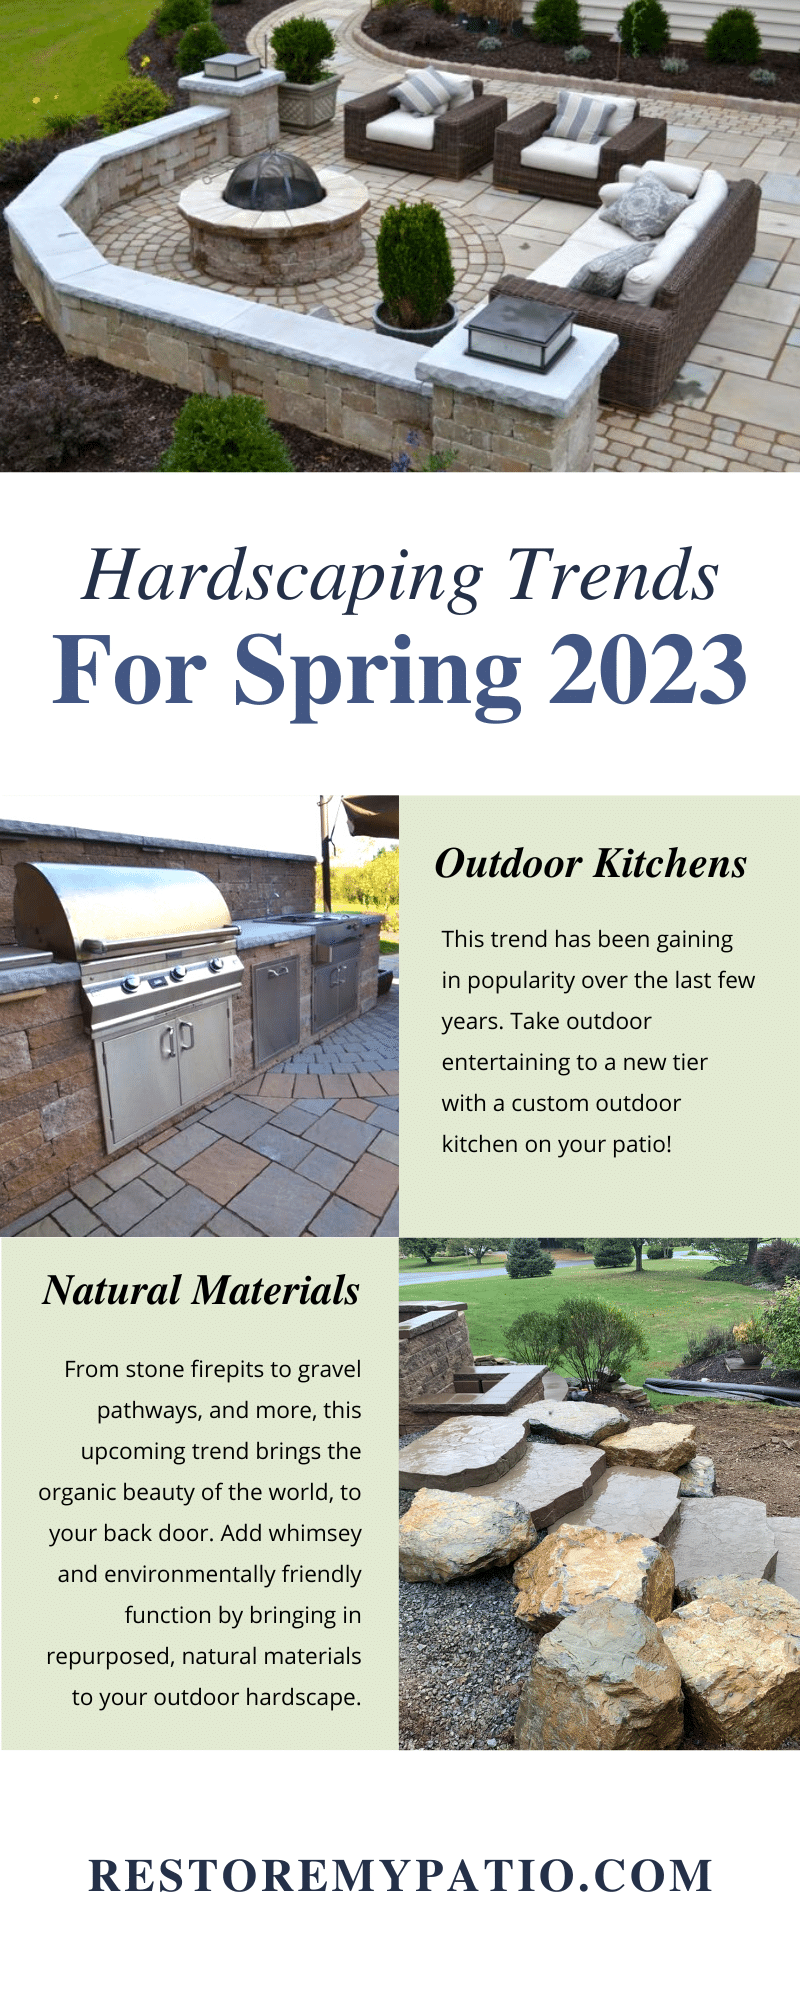 Hardscaping Trends for 2023 1